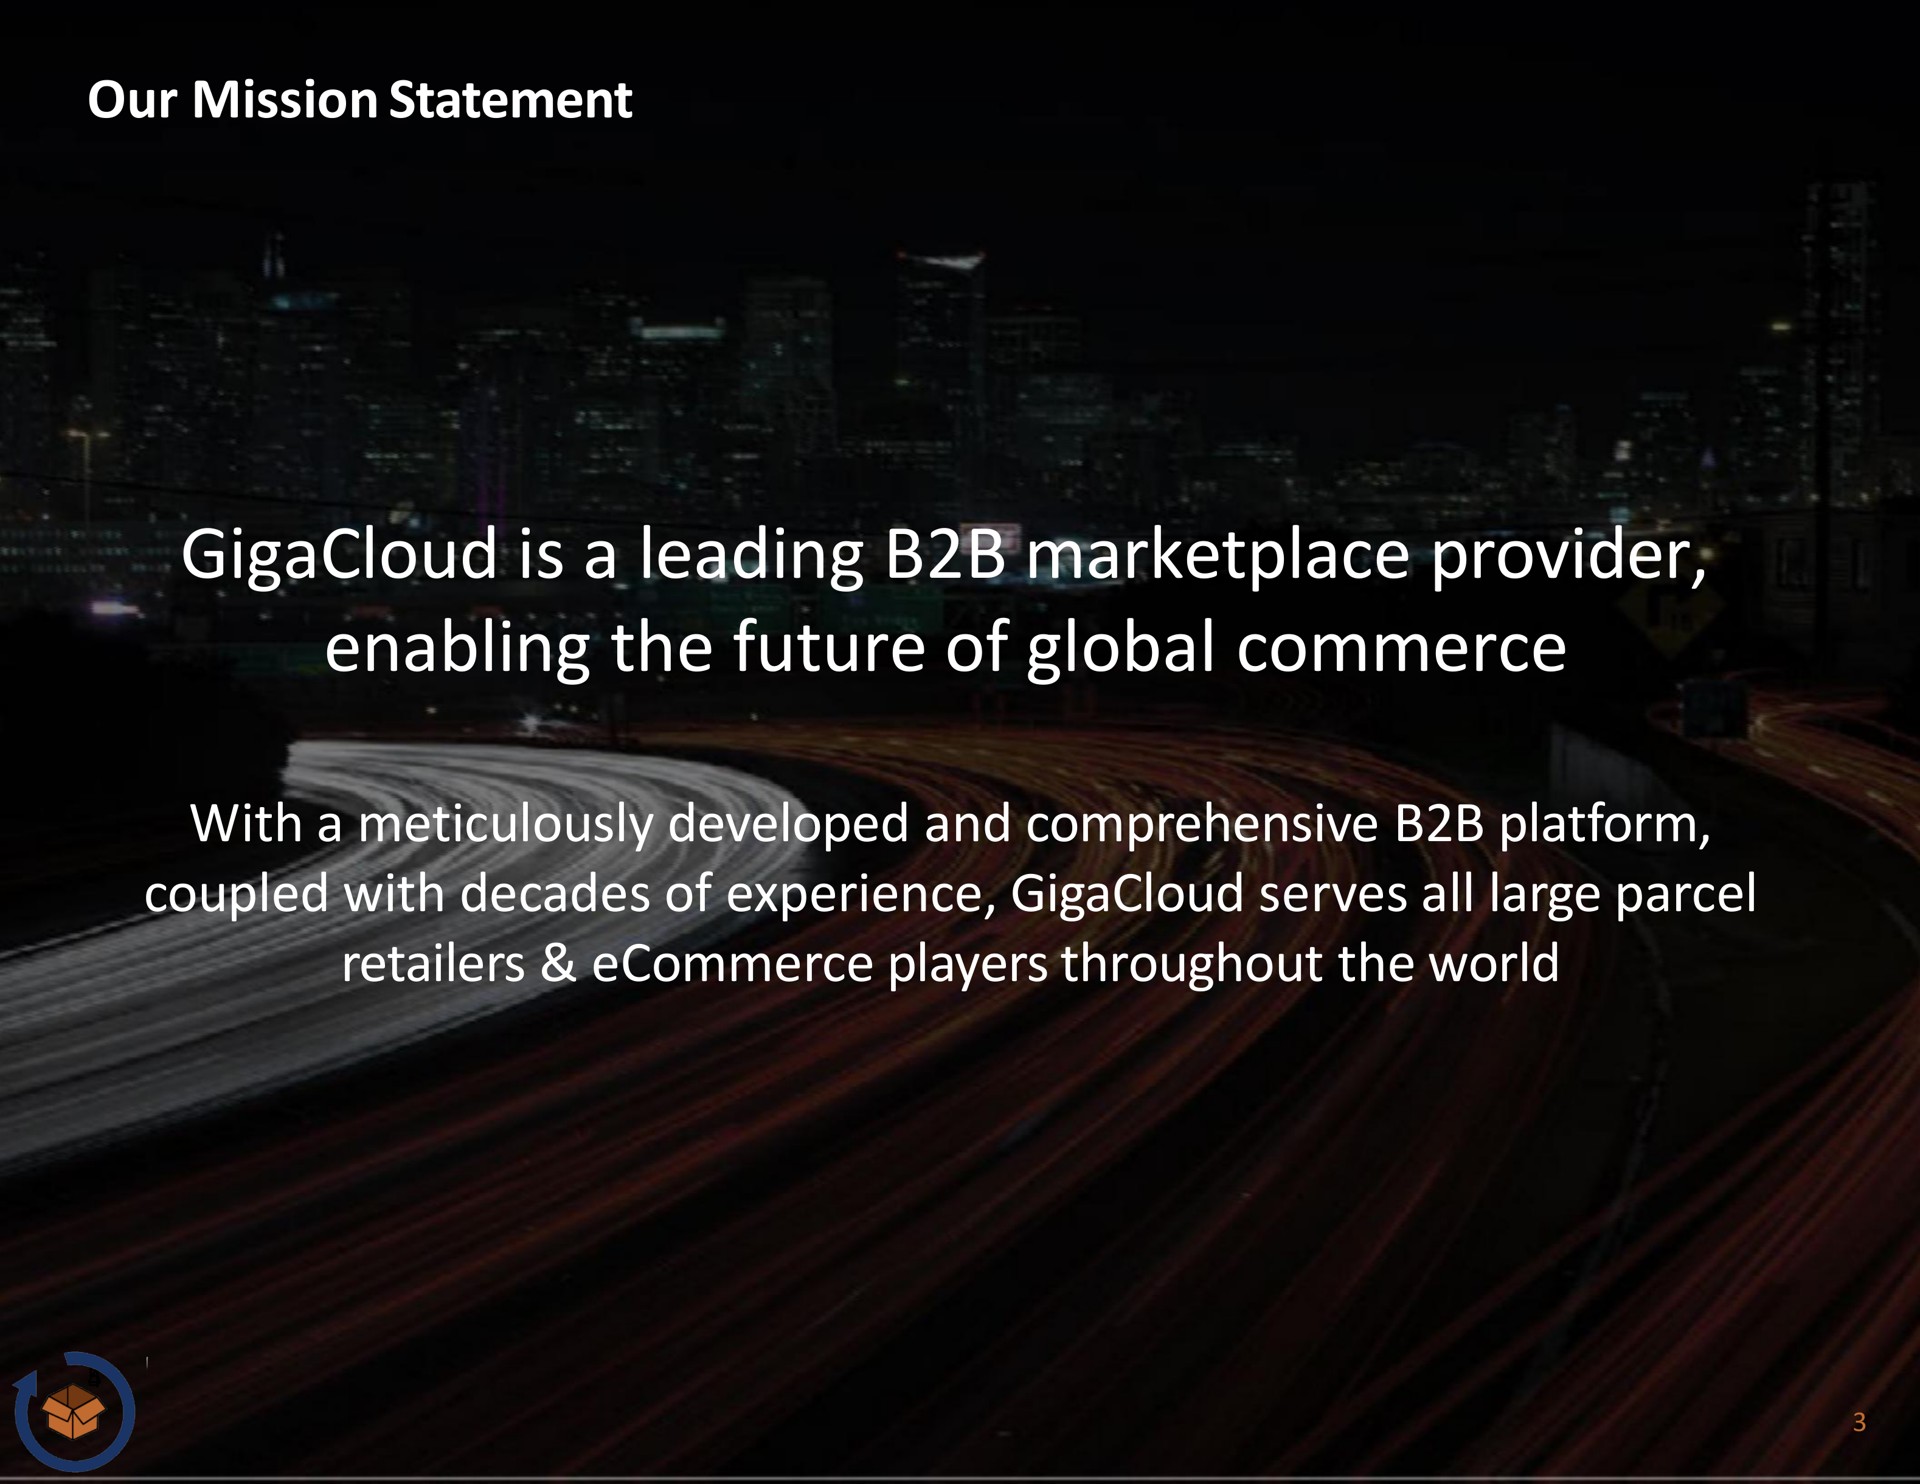 our mission statement is a leading provider enabling the future of global commerce with a meticulously developed and comprehensive platform coupled with decades of experience serves all large parcel retailers players throughout the world | GigaCloud Technology